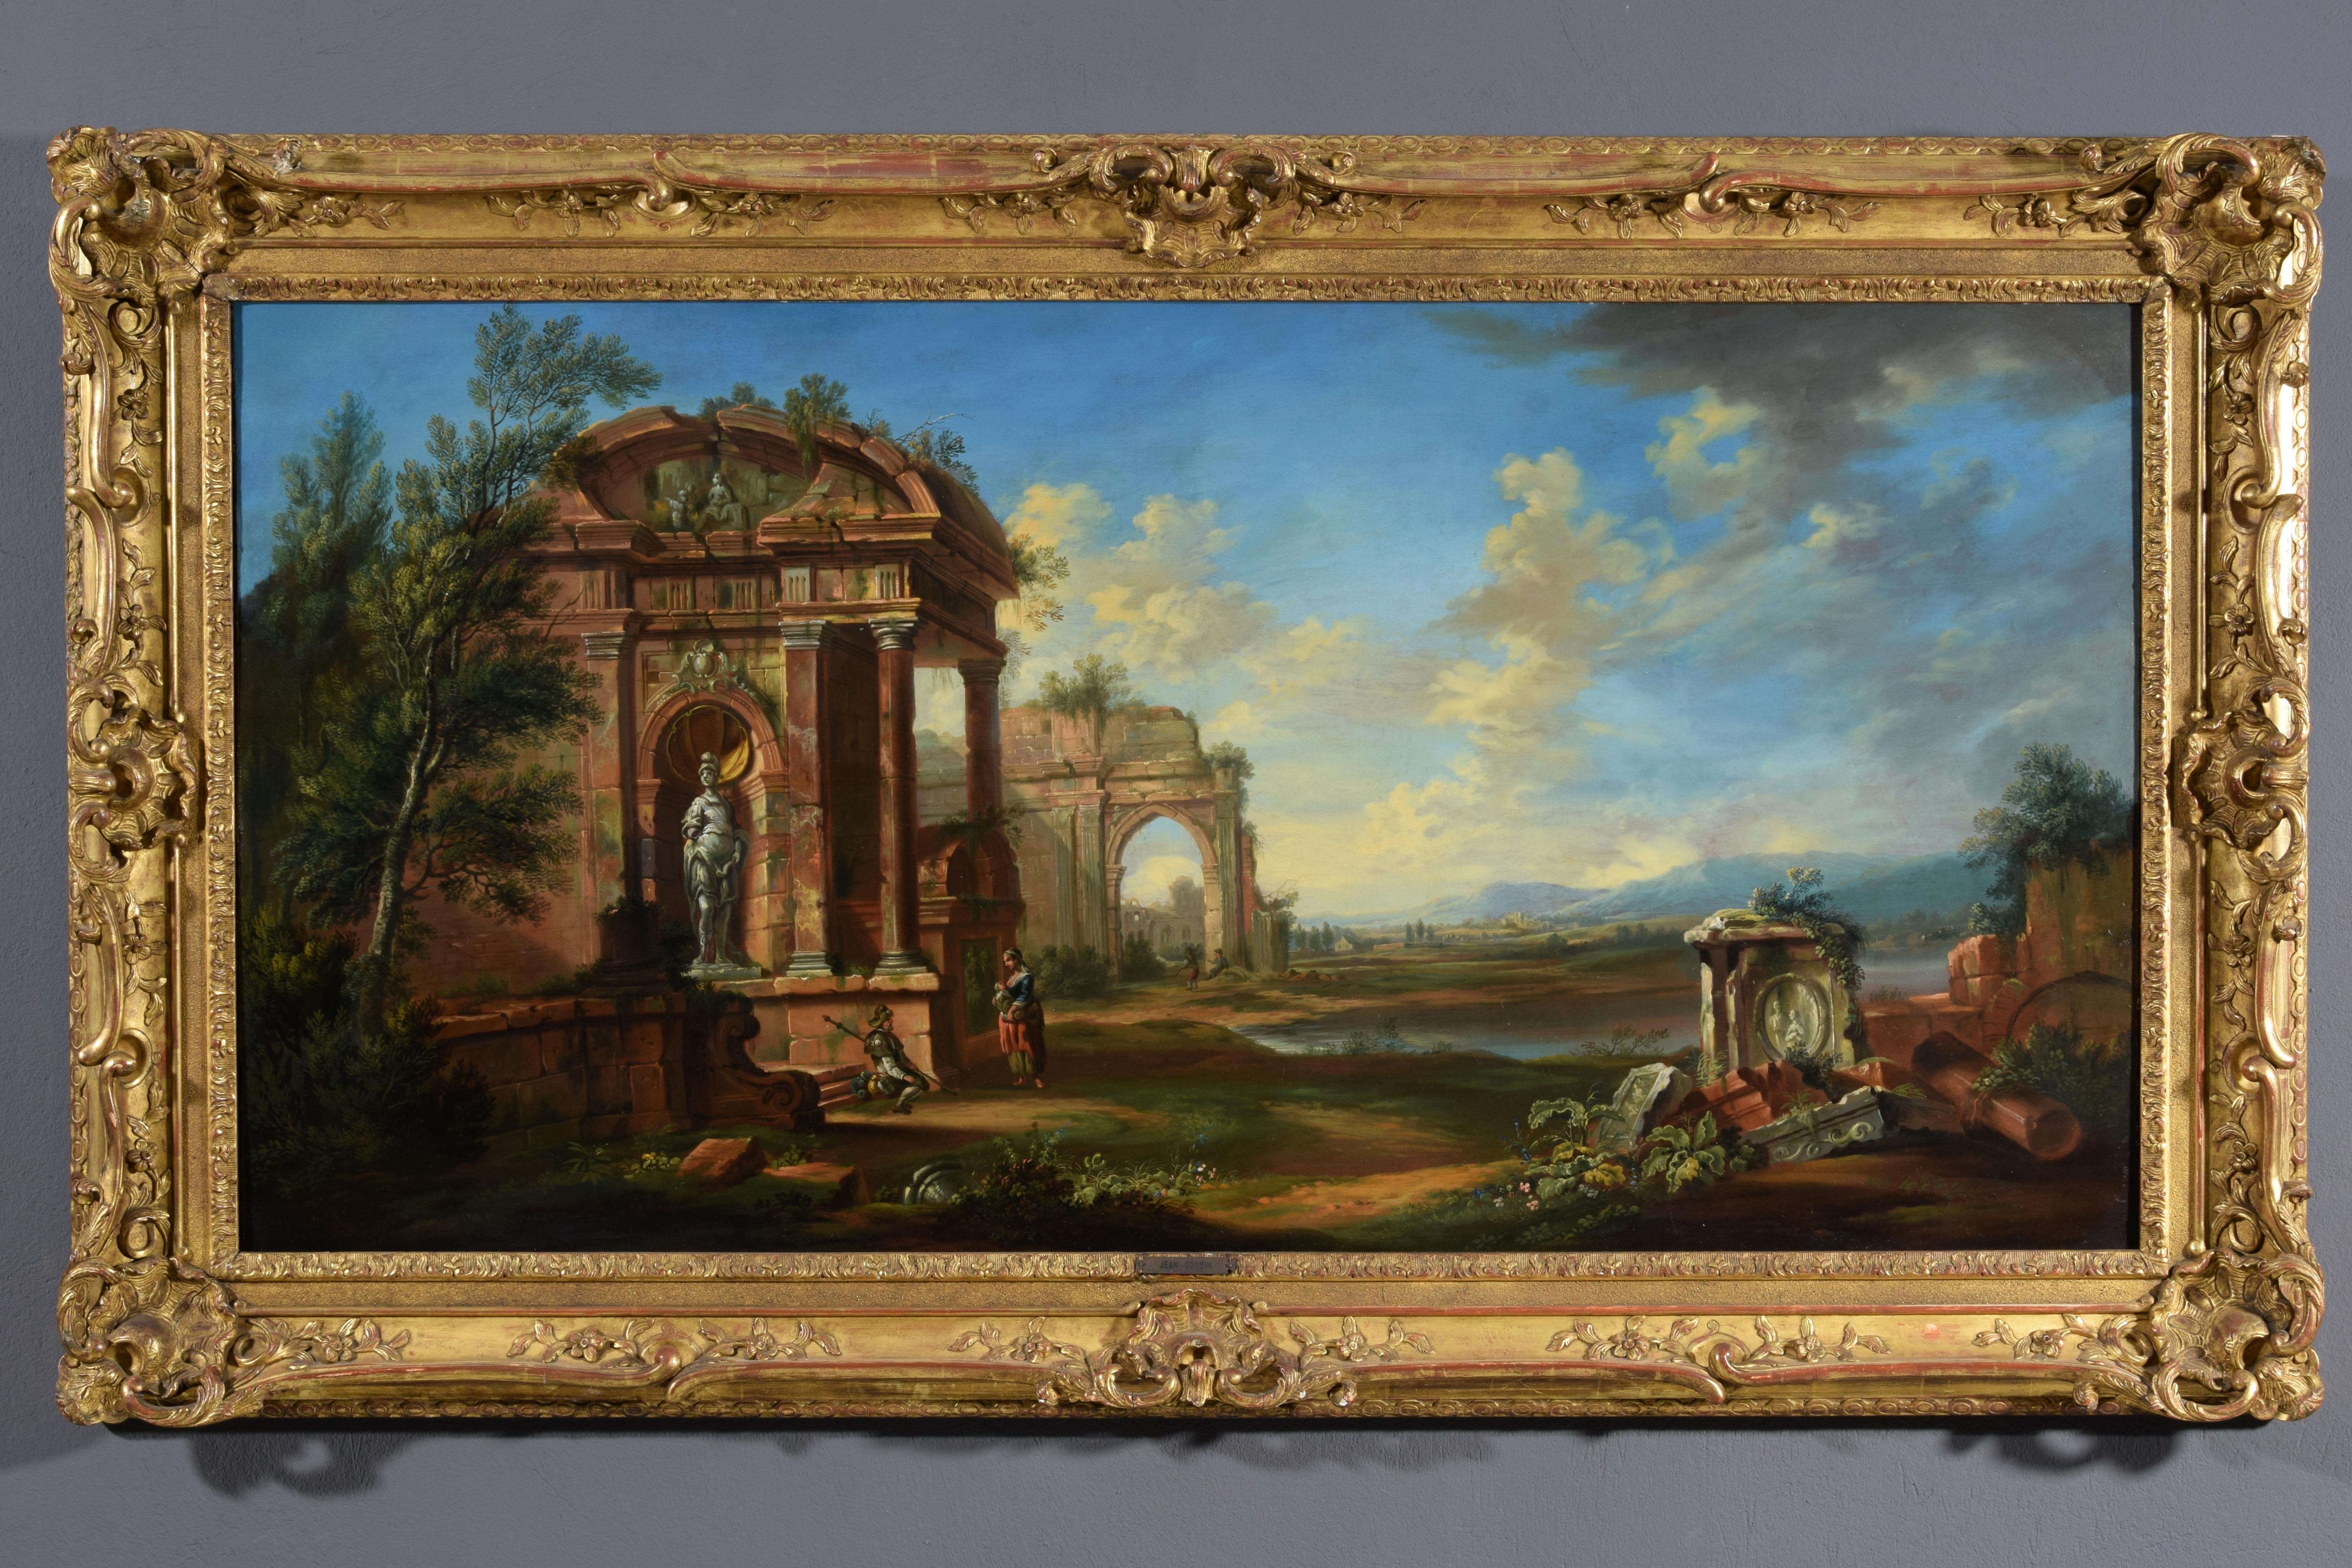 18th century, French Painting with Landscape with Ruins 
Measures: frame cm L 165 x H 95 x P 10; canvas cm L 142 x H 71 

This painting depicting a landscape with architectural ruins was made in oil on canvas in the late 18th century in